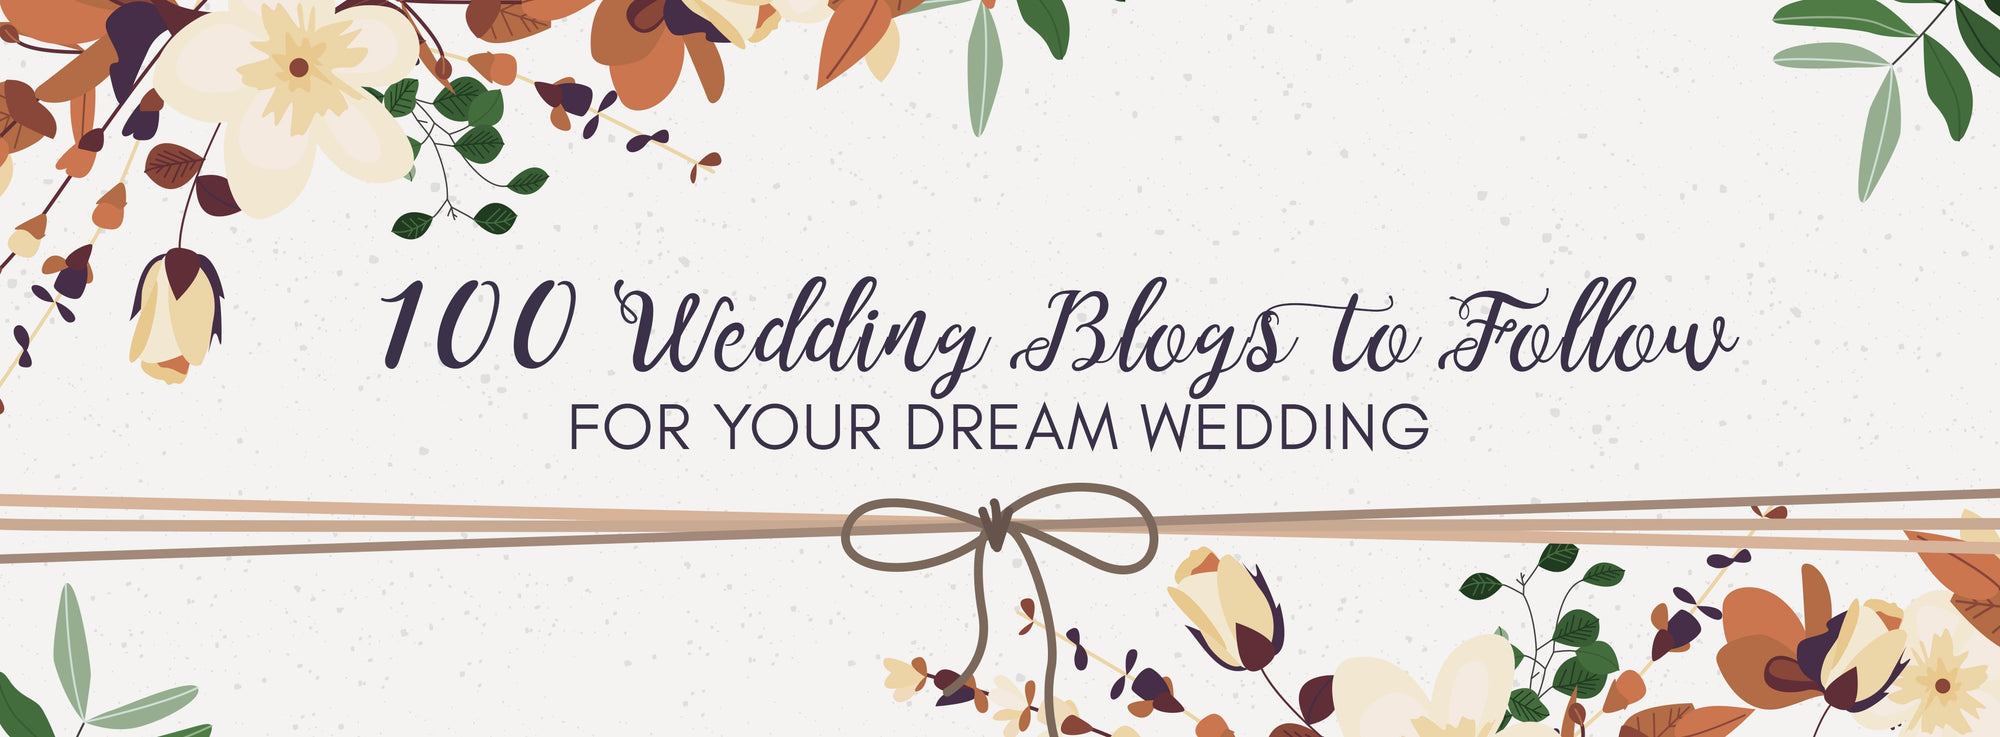 Top 100 Wedding Blogs to Follow for Your Dream Wedding